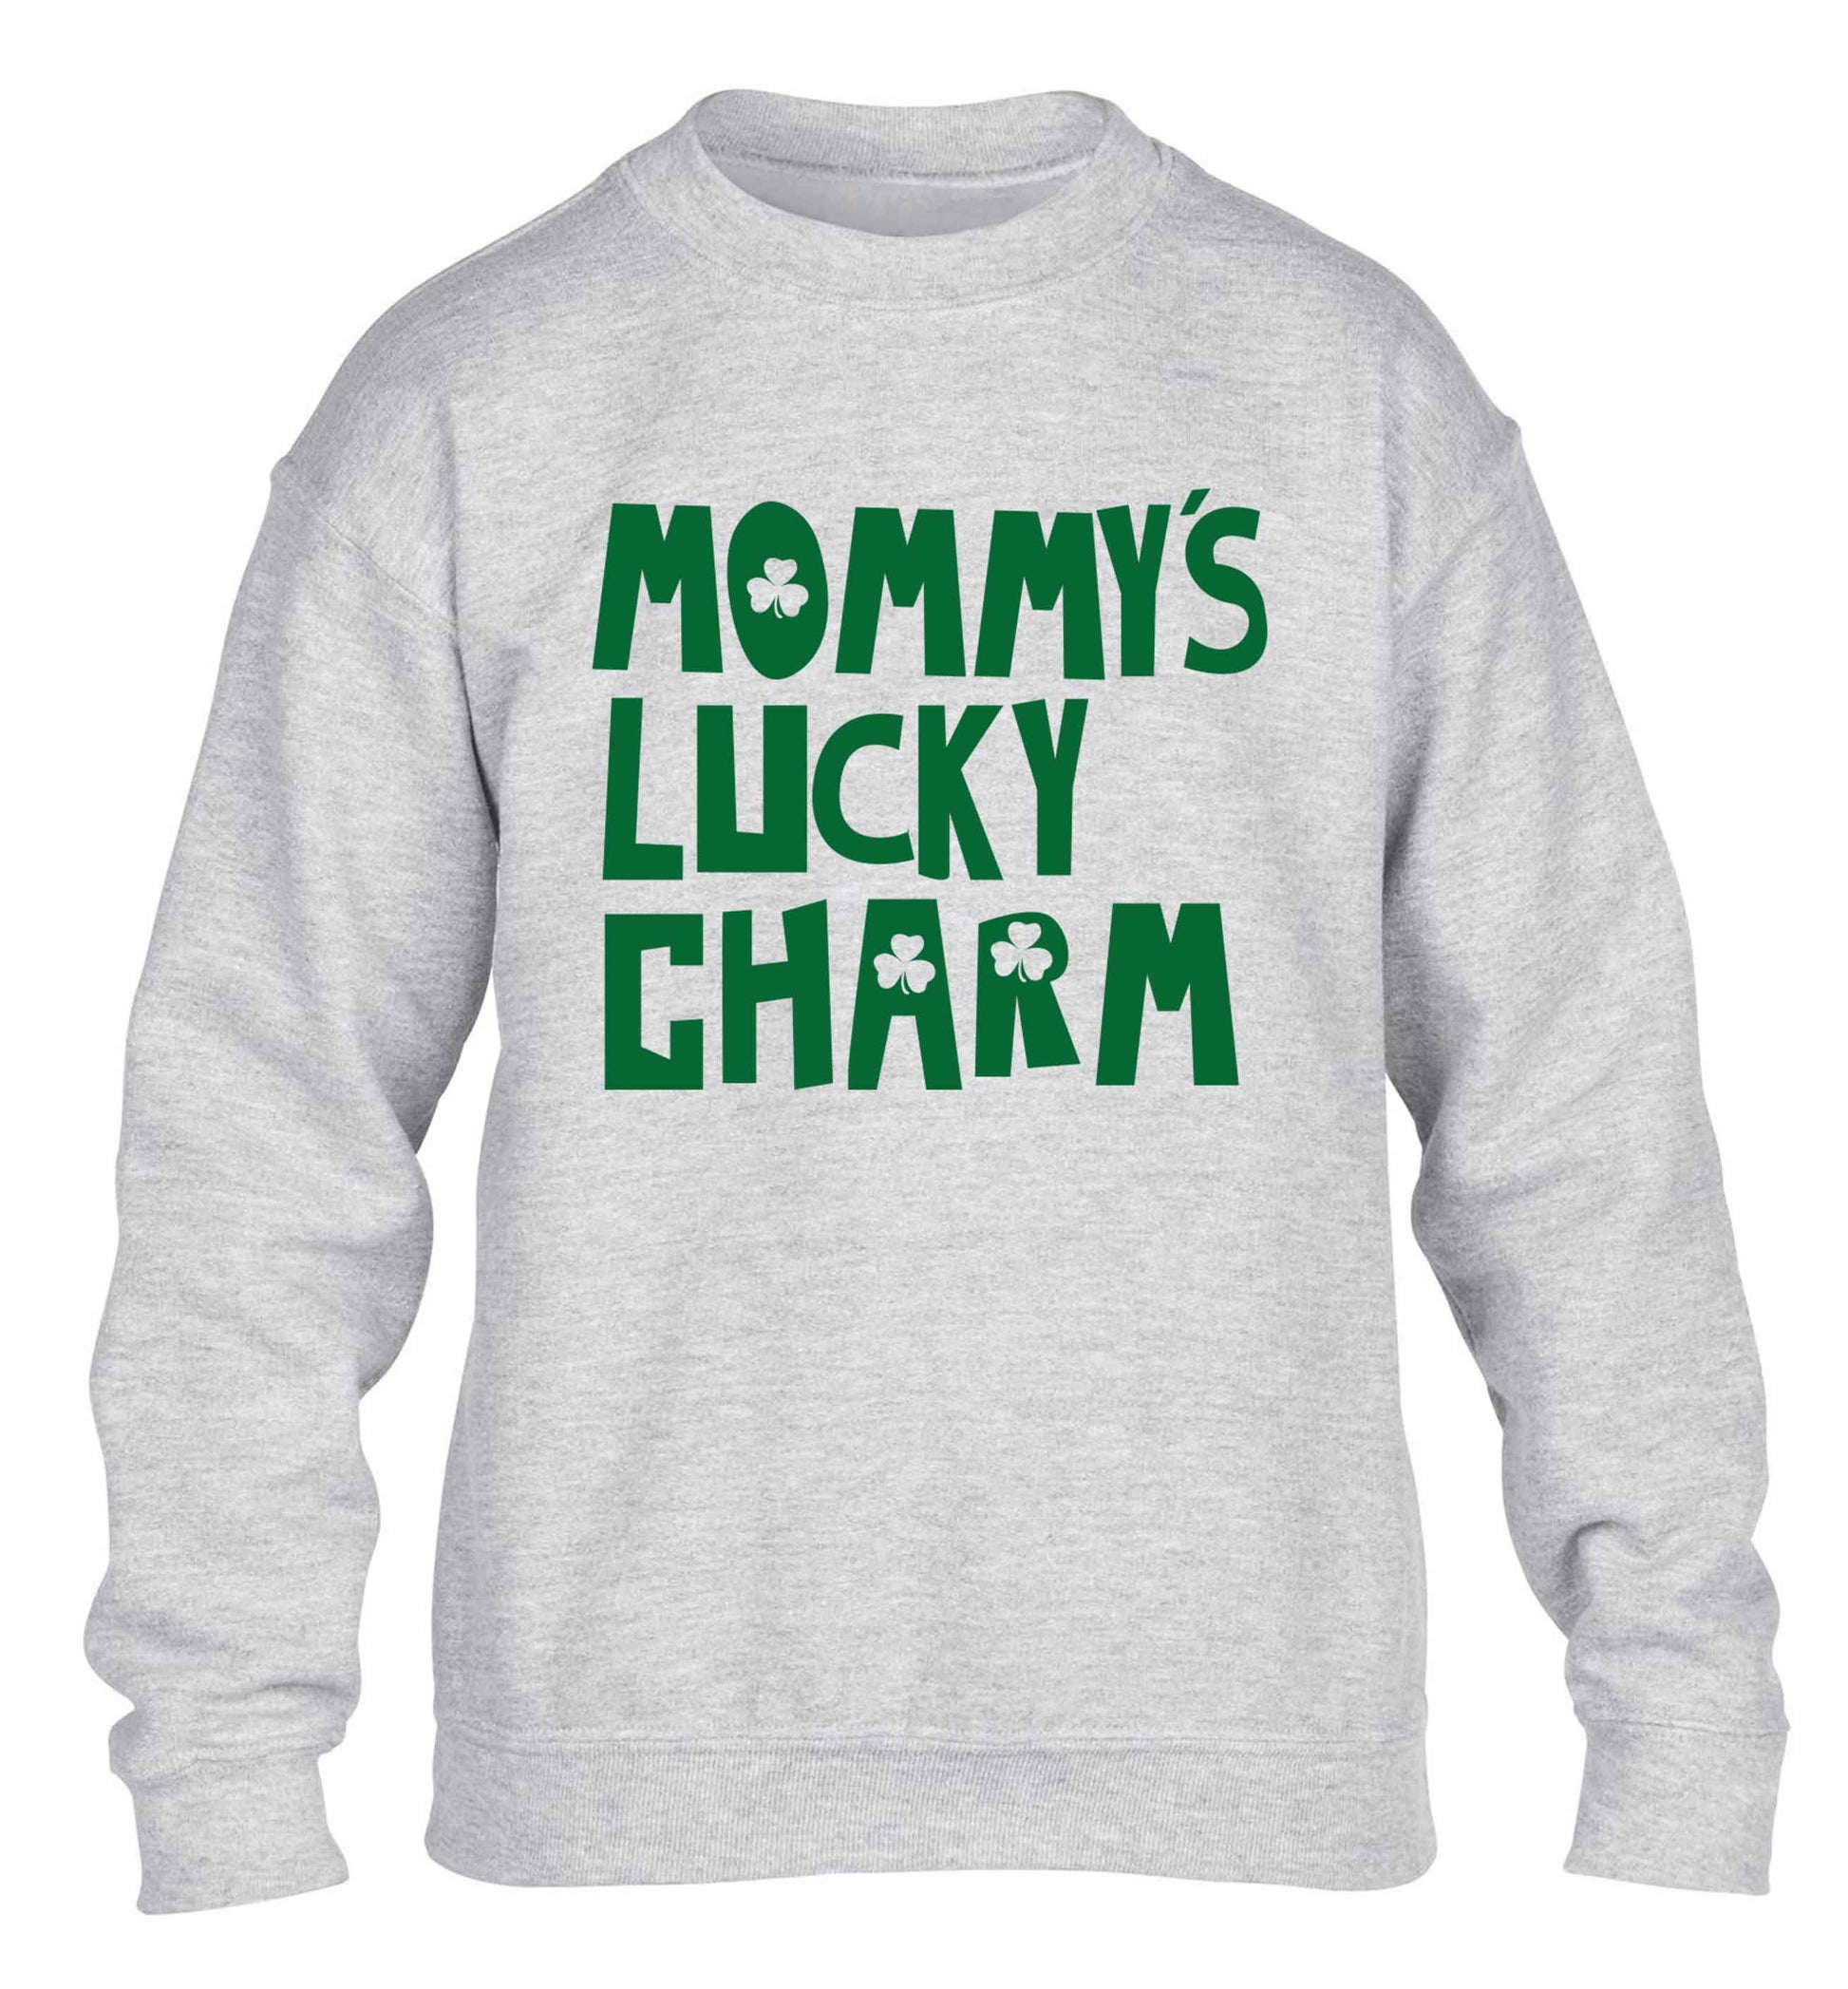 Mommy's lucky charm children's grey sweater 12-13 Years